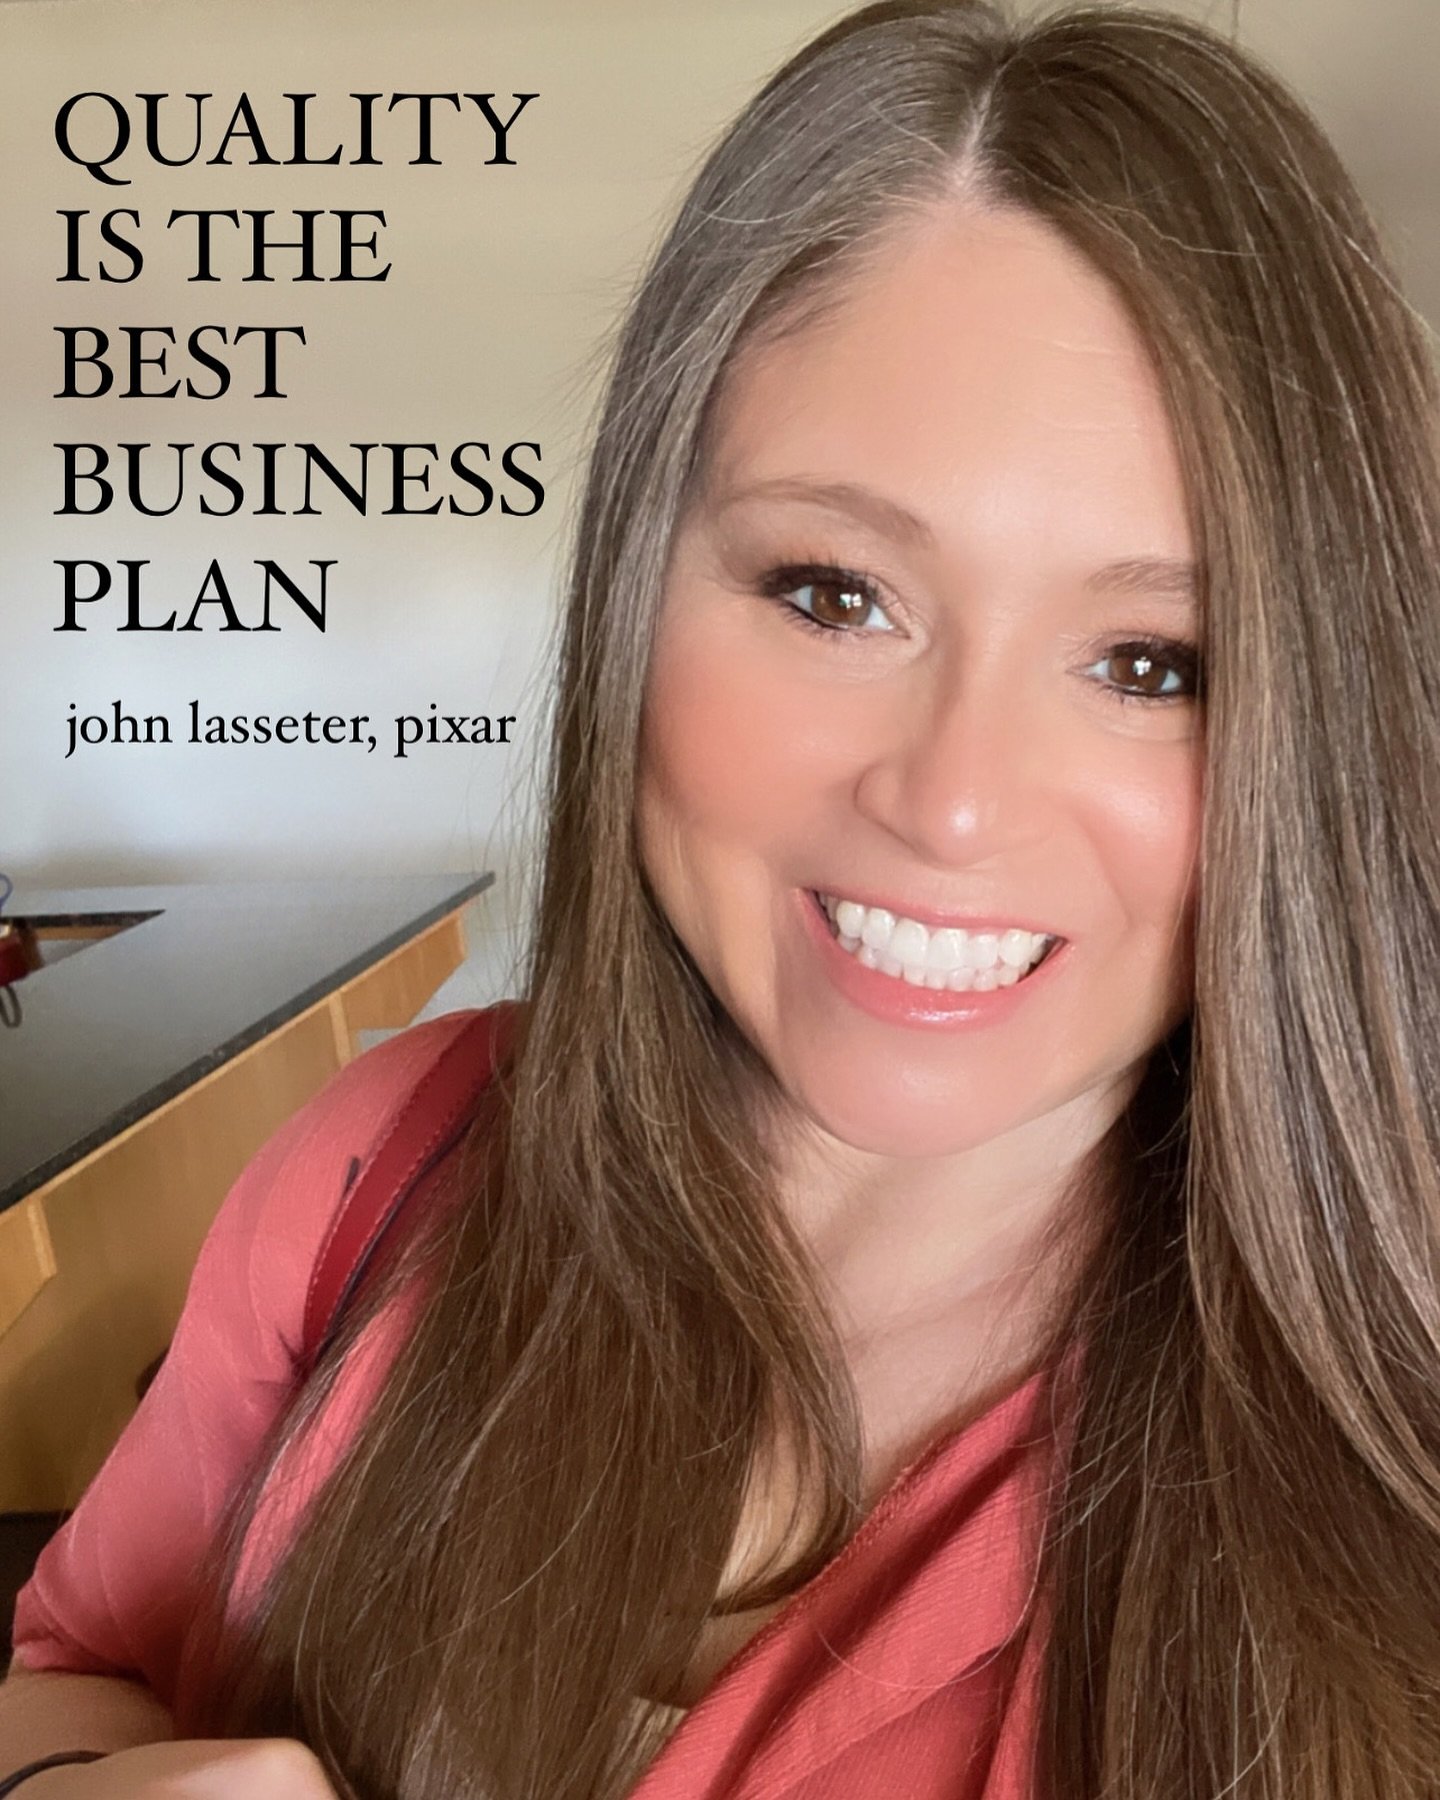 Let your commitment to quality be the cornerstone of your success!  In a world of constant change, one thing remains: QUALITY. It&rsquo;s not just a strategy; it&rsquo;s the best business plan you can have. #annaspencercreativemediadesign #squarespac